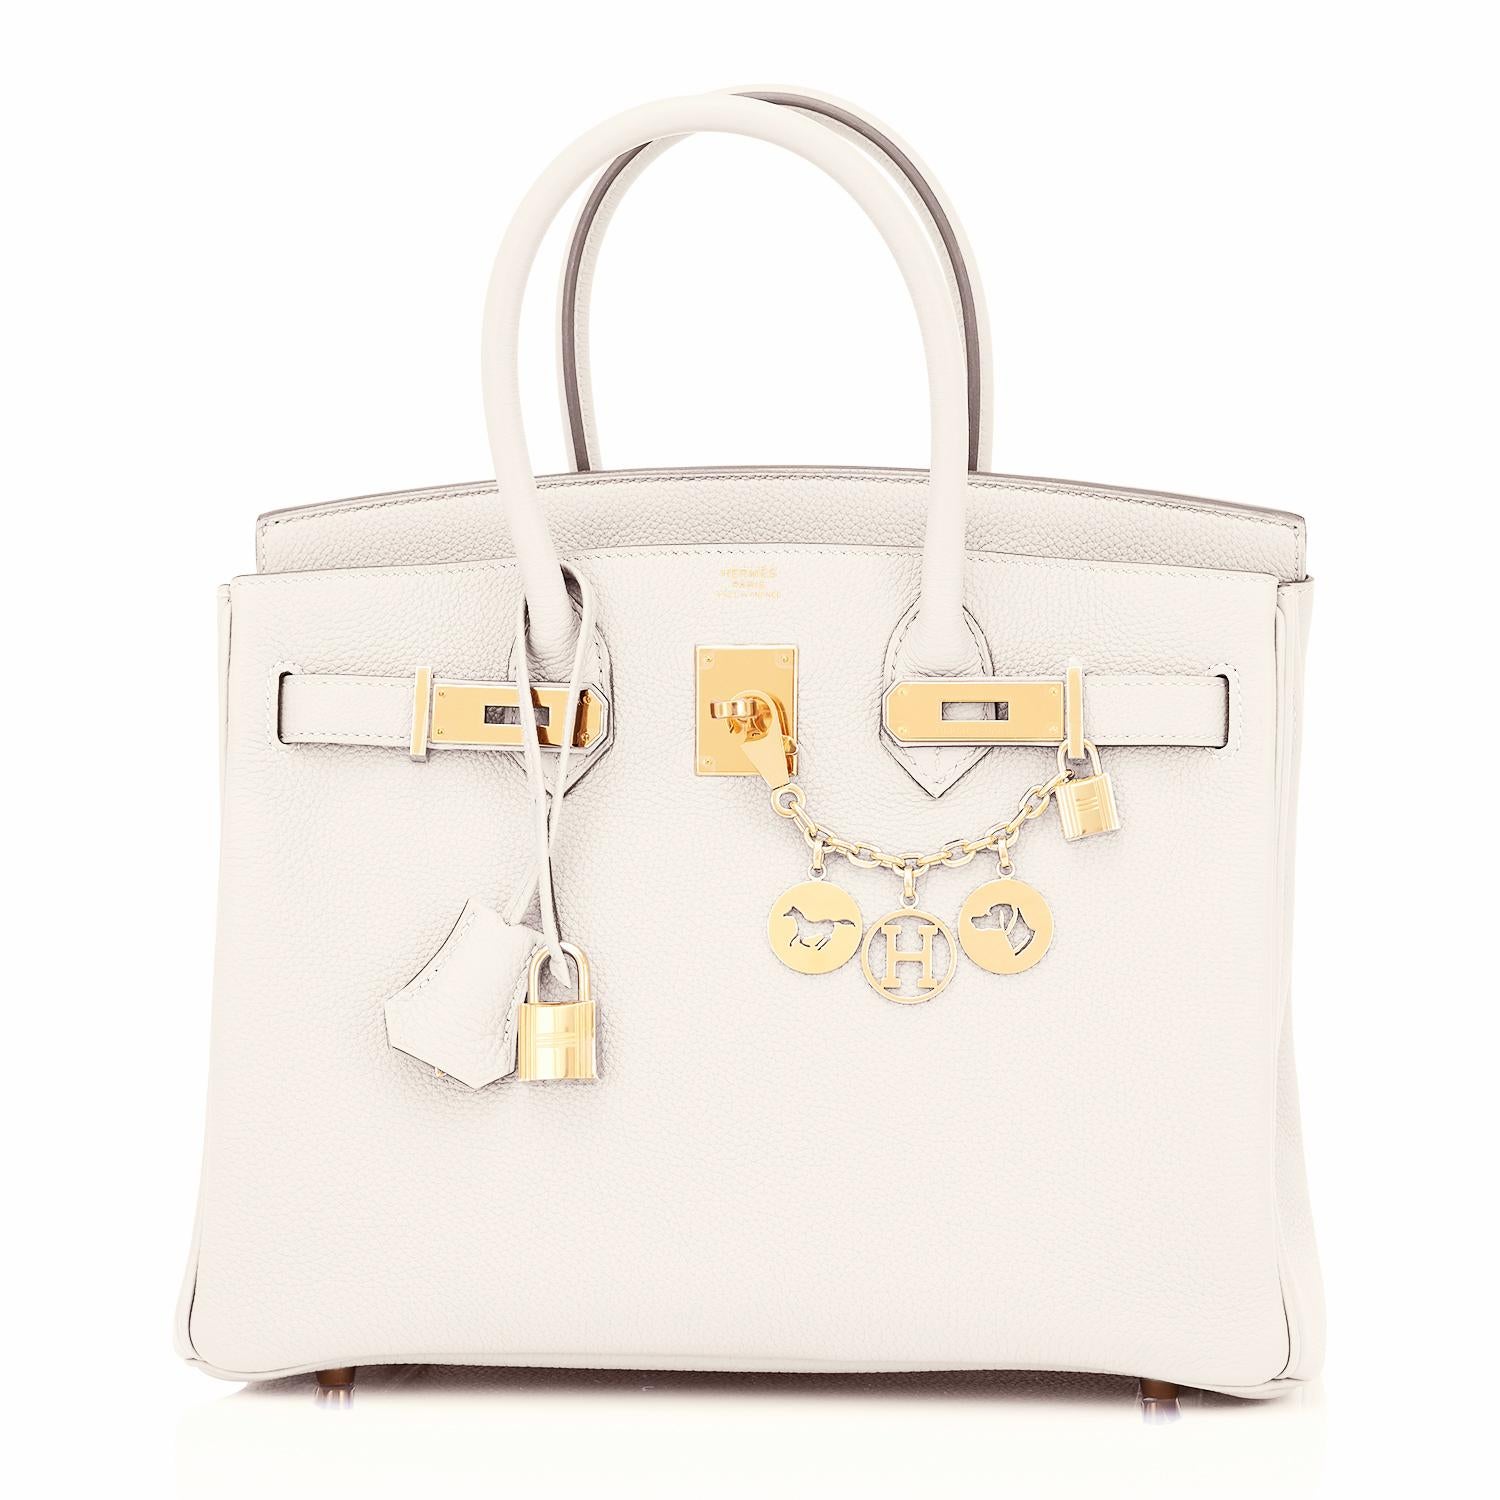 Hermes Craie 30cm Birkin Togo Gold Hardware Chalk Off White Y Stamp, 2020
Just purchased from Hermes store; bag bears new interior 2020 Y Stamp.
Brand New in Box. Store fresh. Pristine Condition (plastic on hardware.)
Perfect gift! Comes in full set